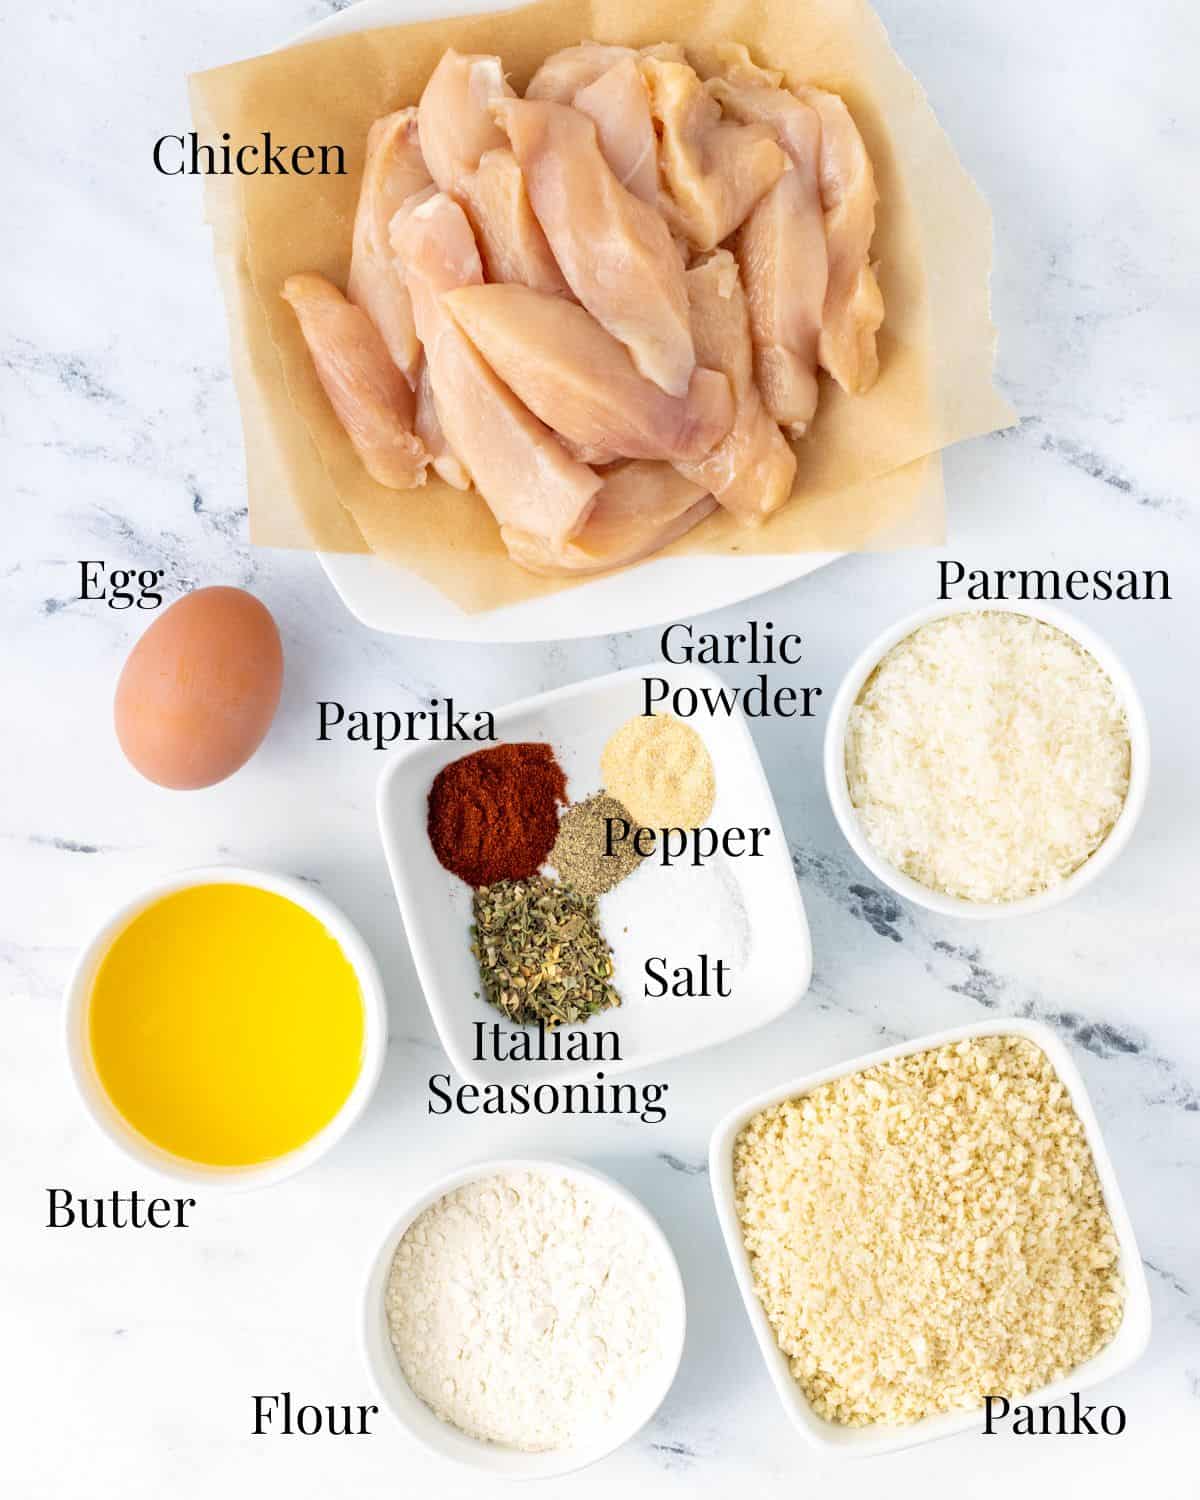 Ingredients for panko crusted chicken with labels.